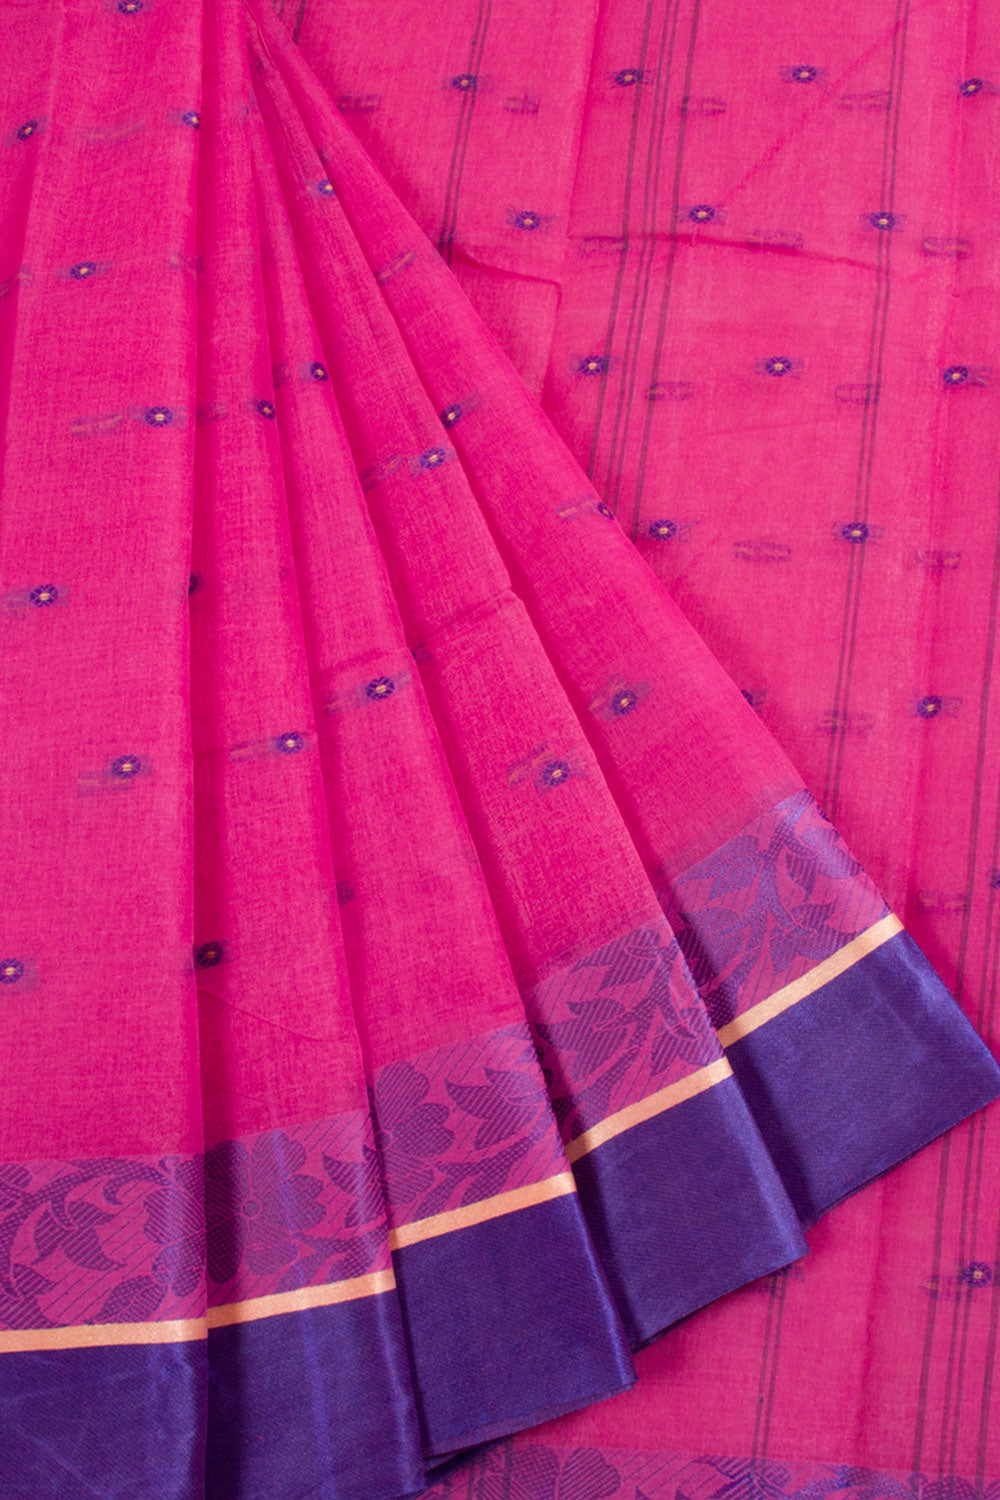 Handwoven Bengal Tant Cotton Saree with Floral Motifs, Floral Border, Paisley Floral Design Pallu and without Blouse